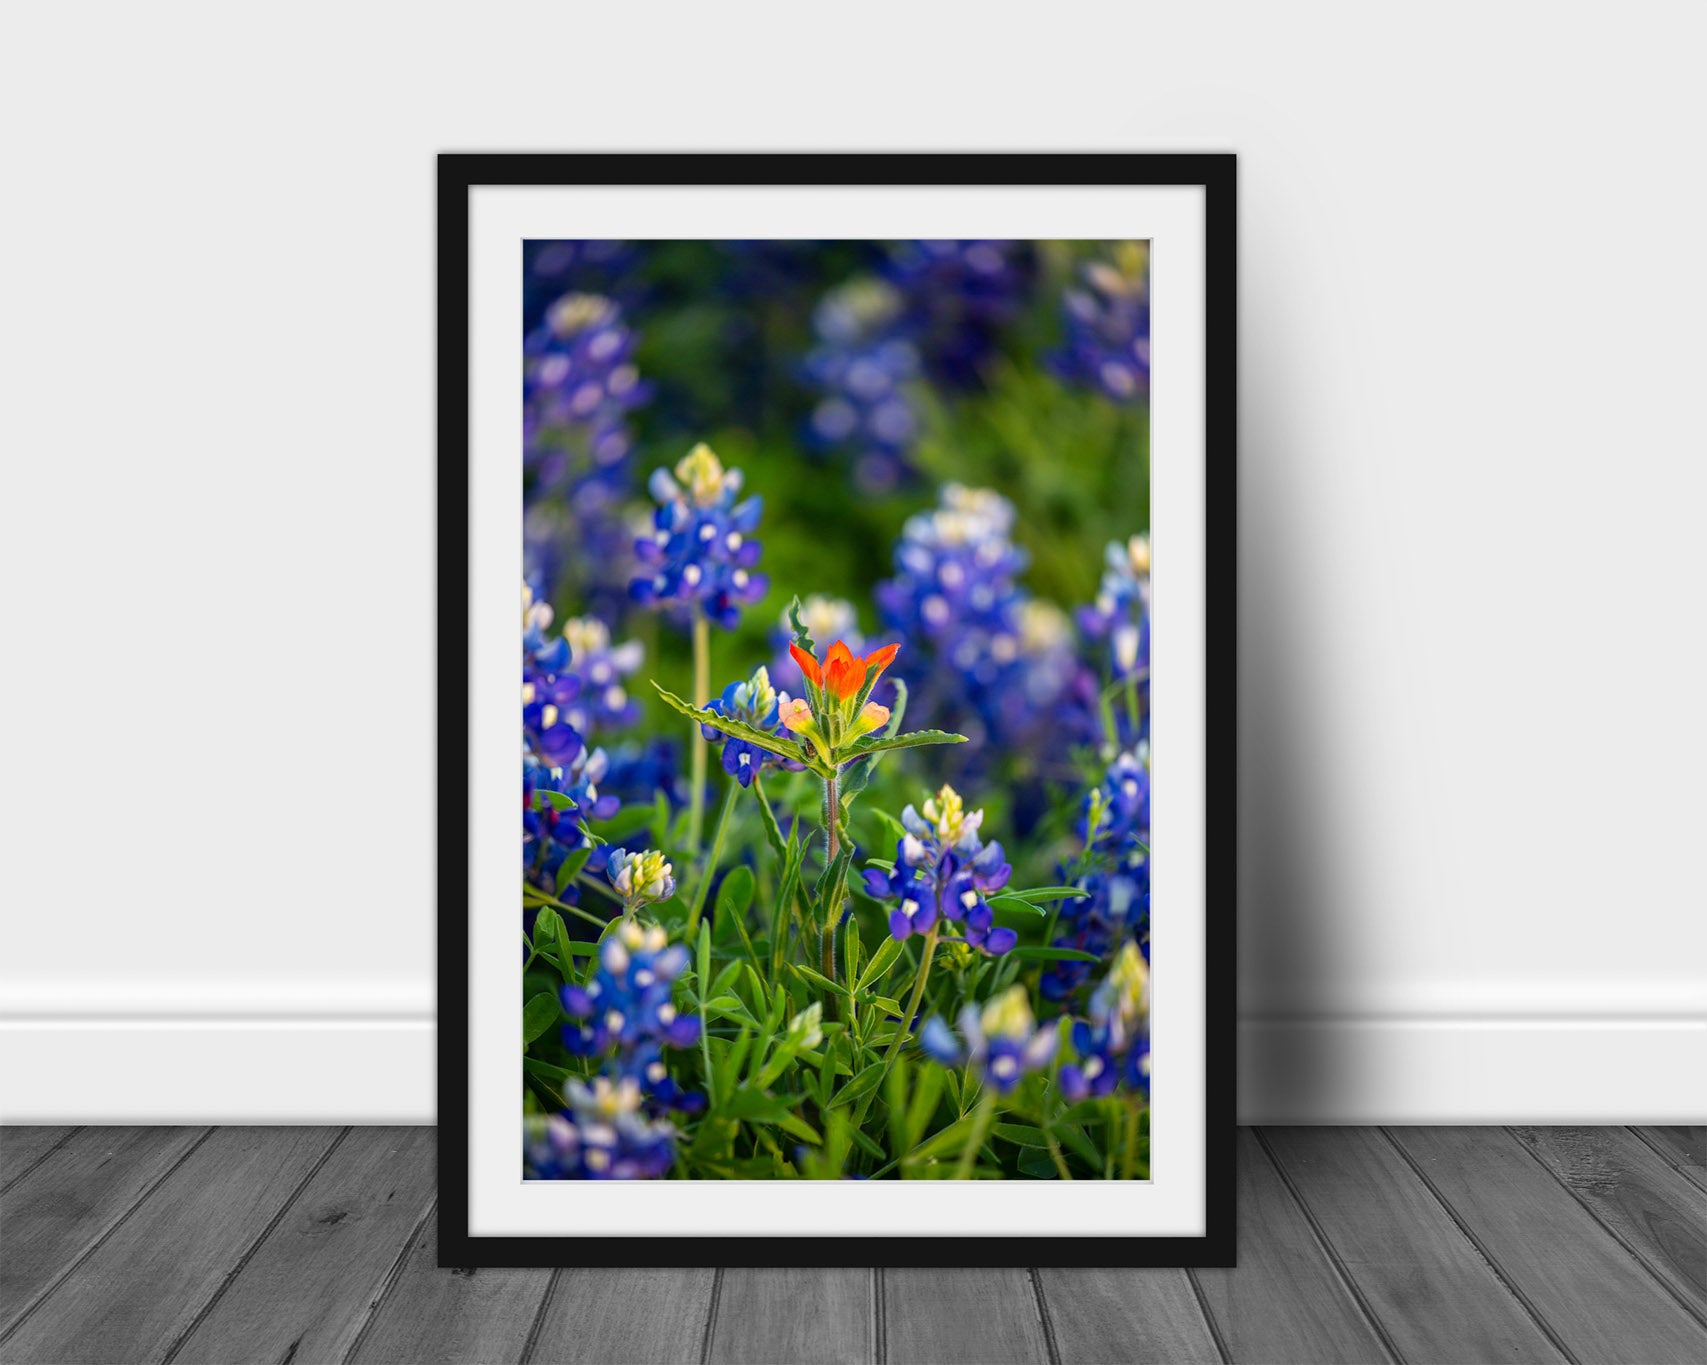 Vertical framed flower photography print with optional mat of an individual Indian paintbrush wildflower standing out amongst bluebonnets on a spring day in Texas by Sean Ramsey of Southern Plains Photography.